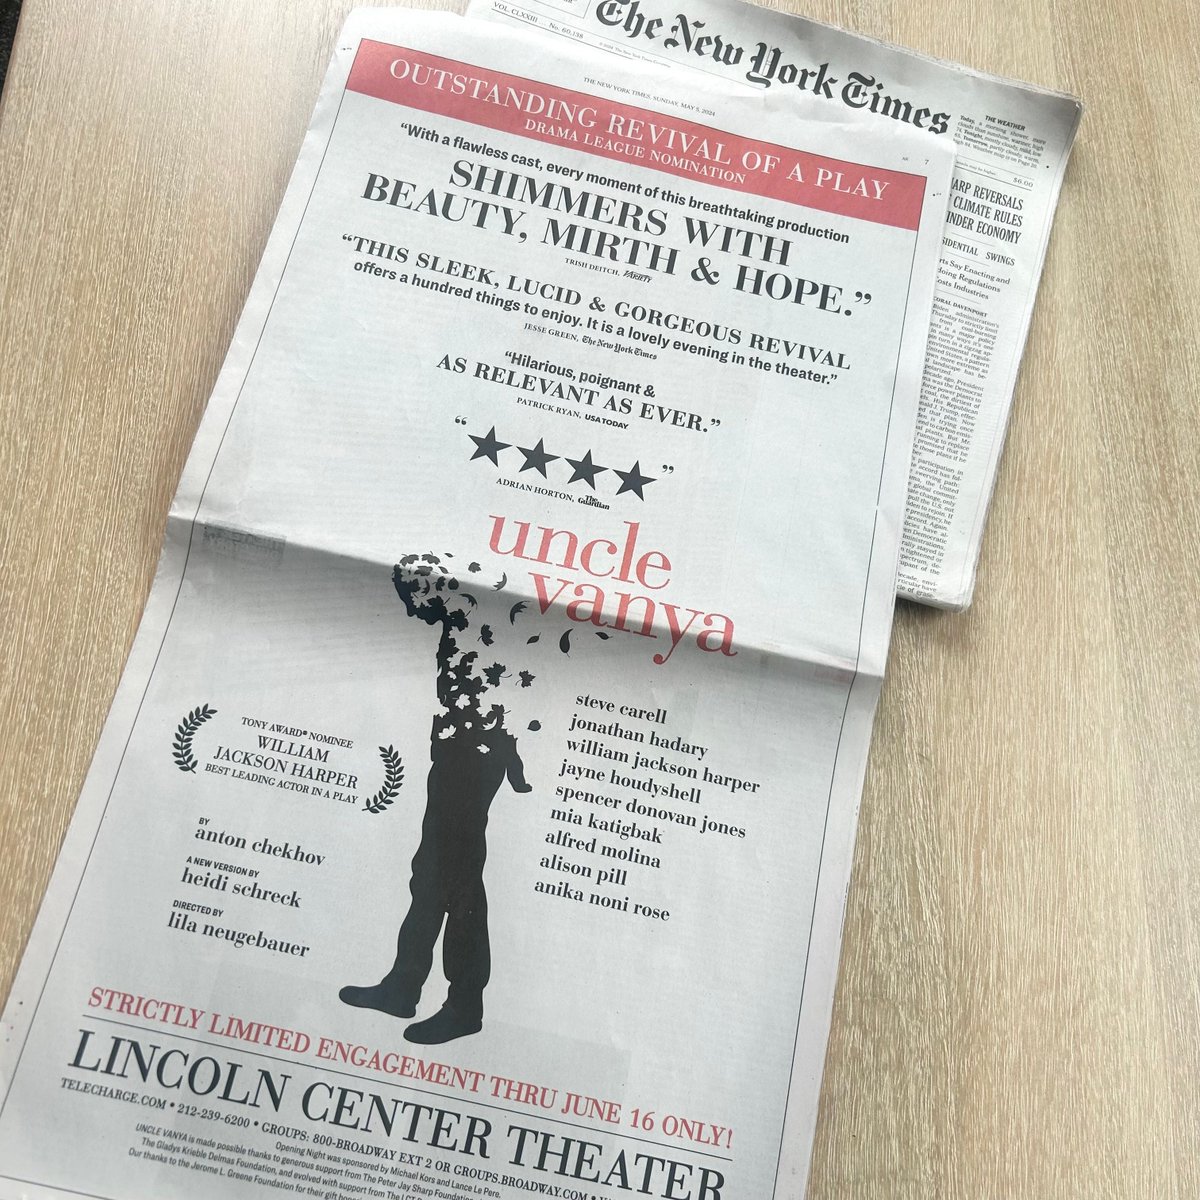 Catch UNCLE VANYA in the @nytimes today, and don’t miss this “lovely evening in the theater” through June 16 ONLY! Get tickets at LCT.org

#VanyaBway